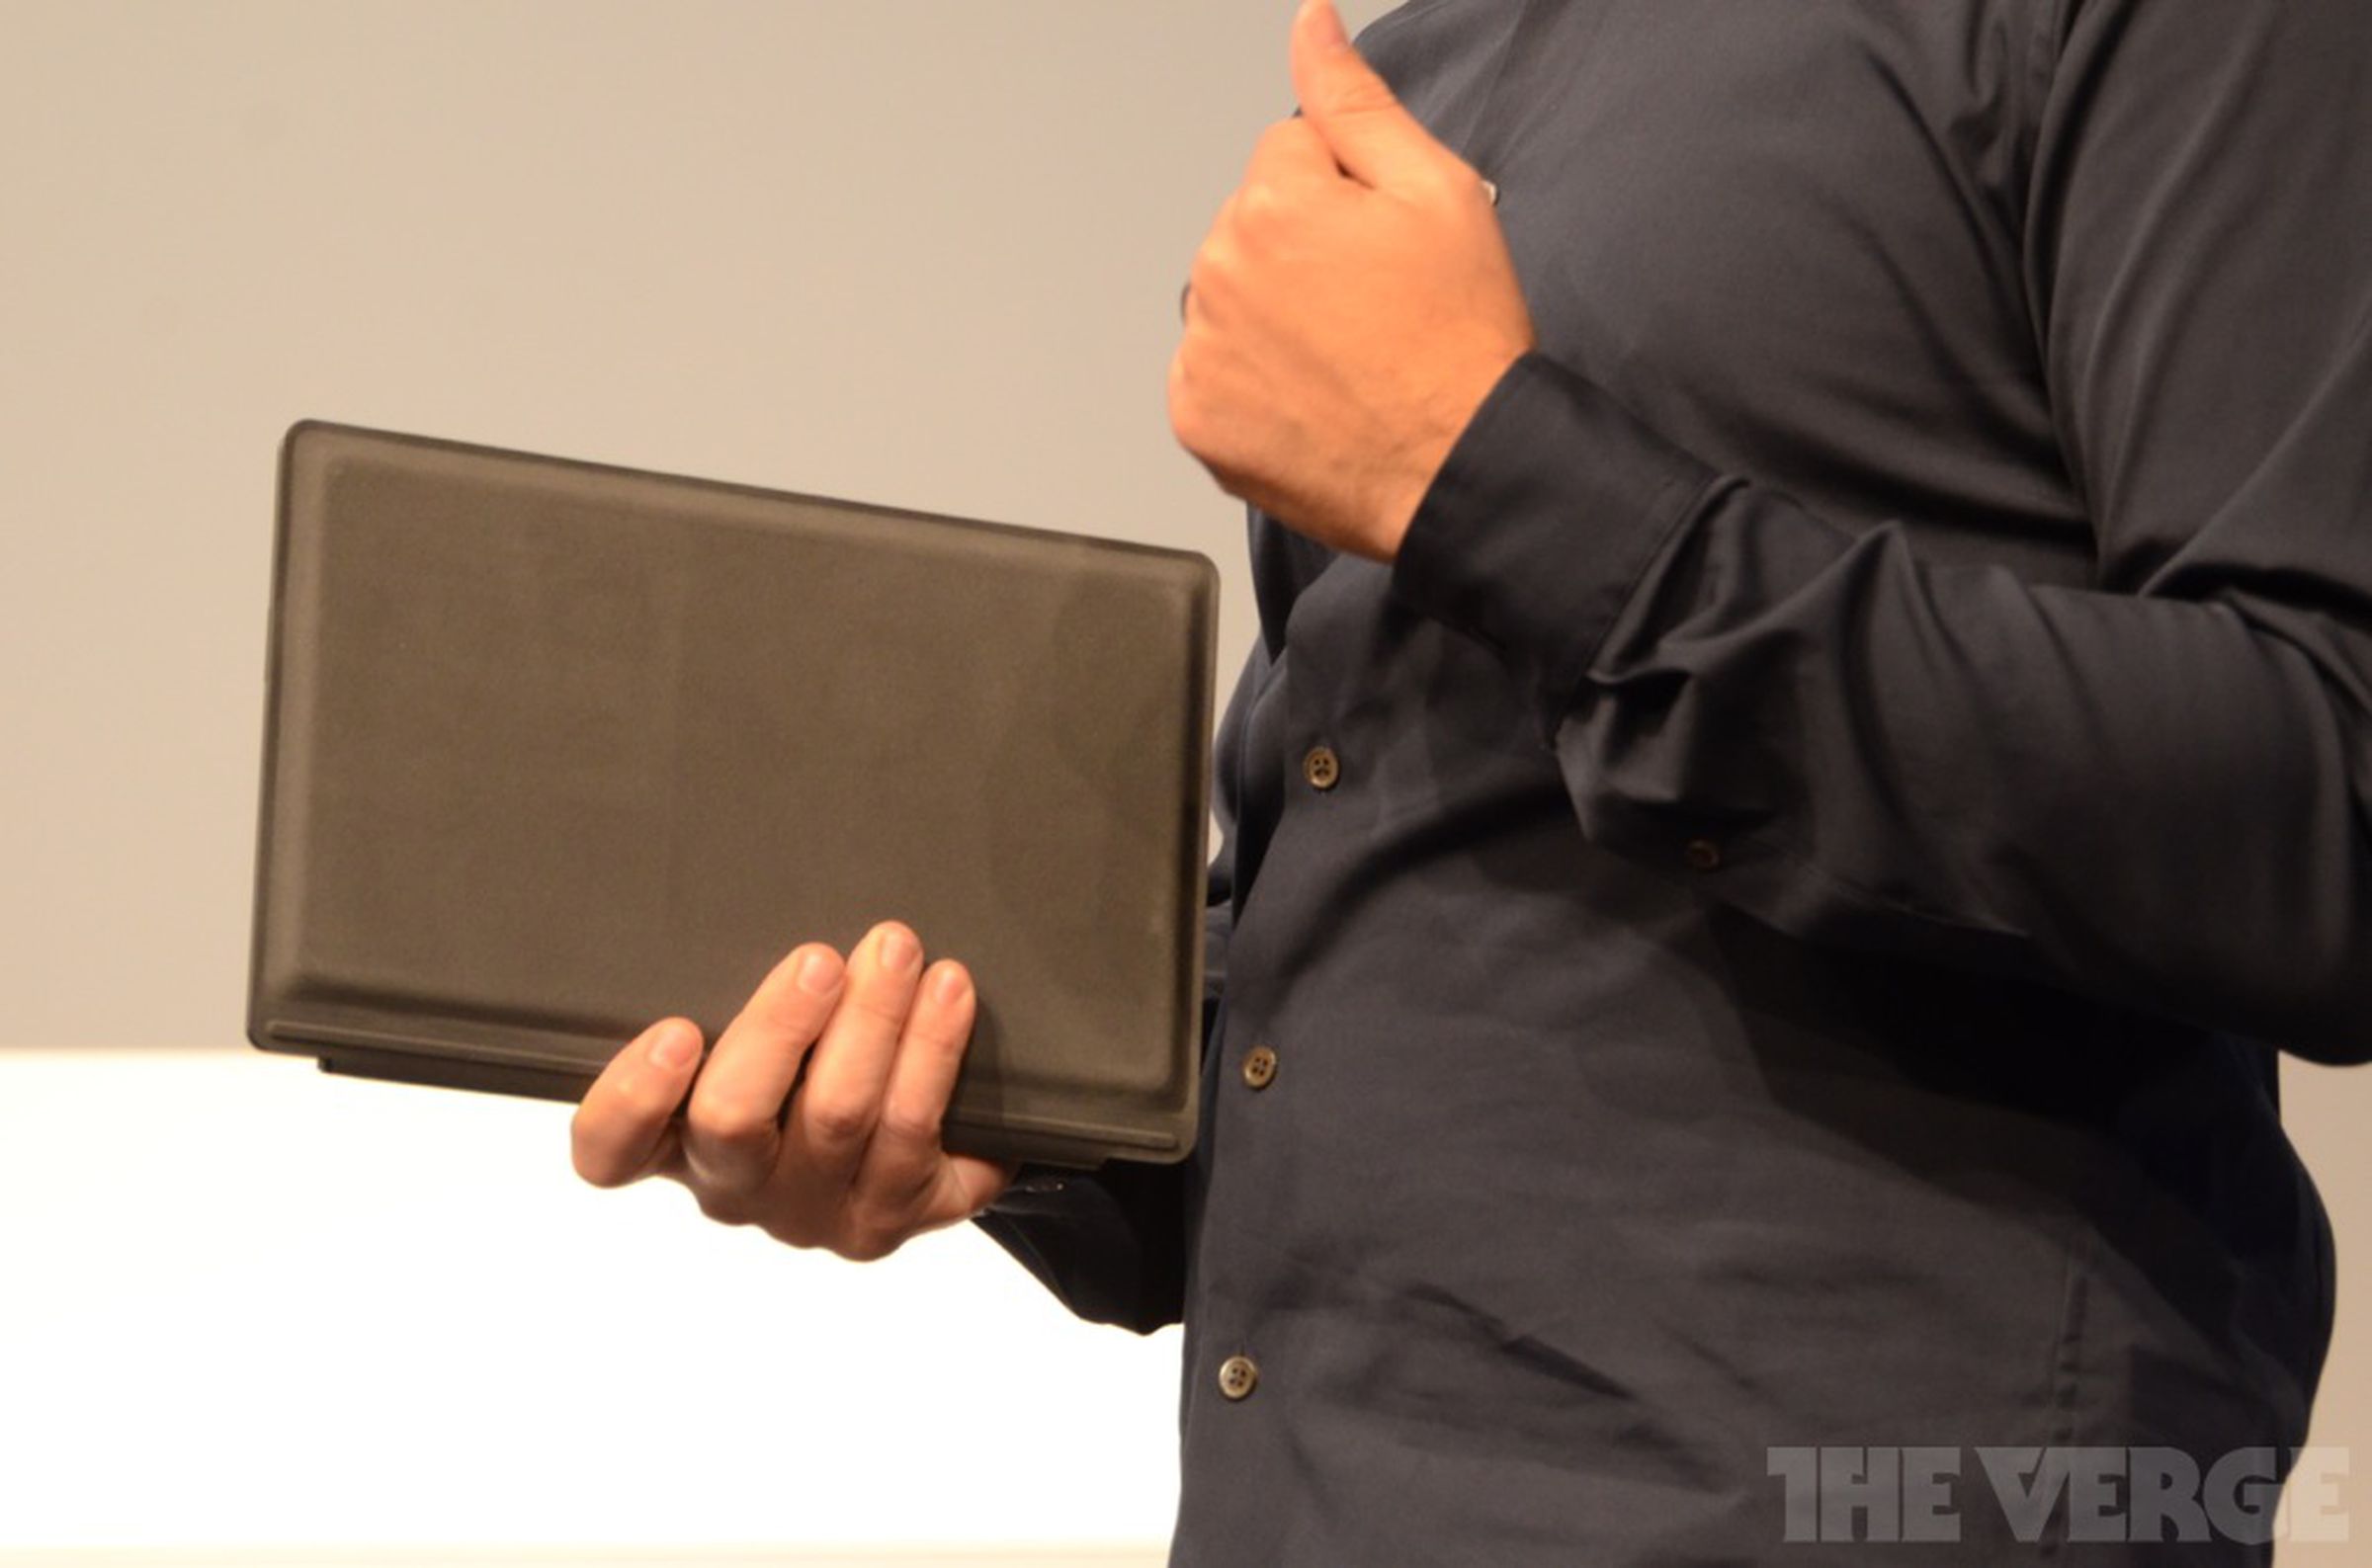 Surface Pro 2 Power Cover and Docking Station announce photos